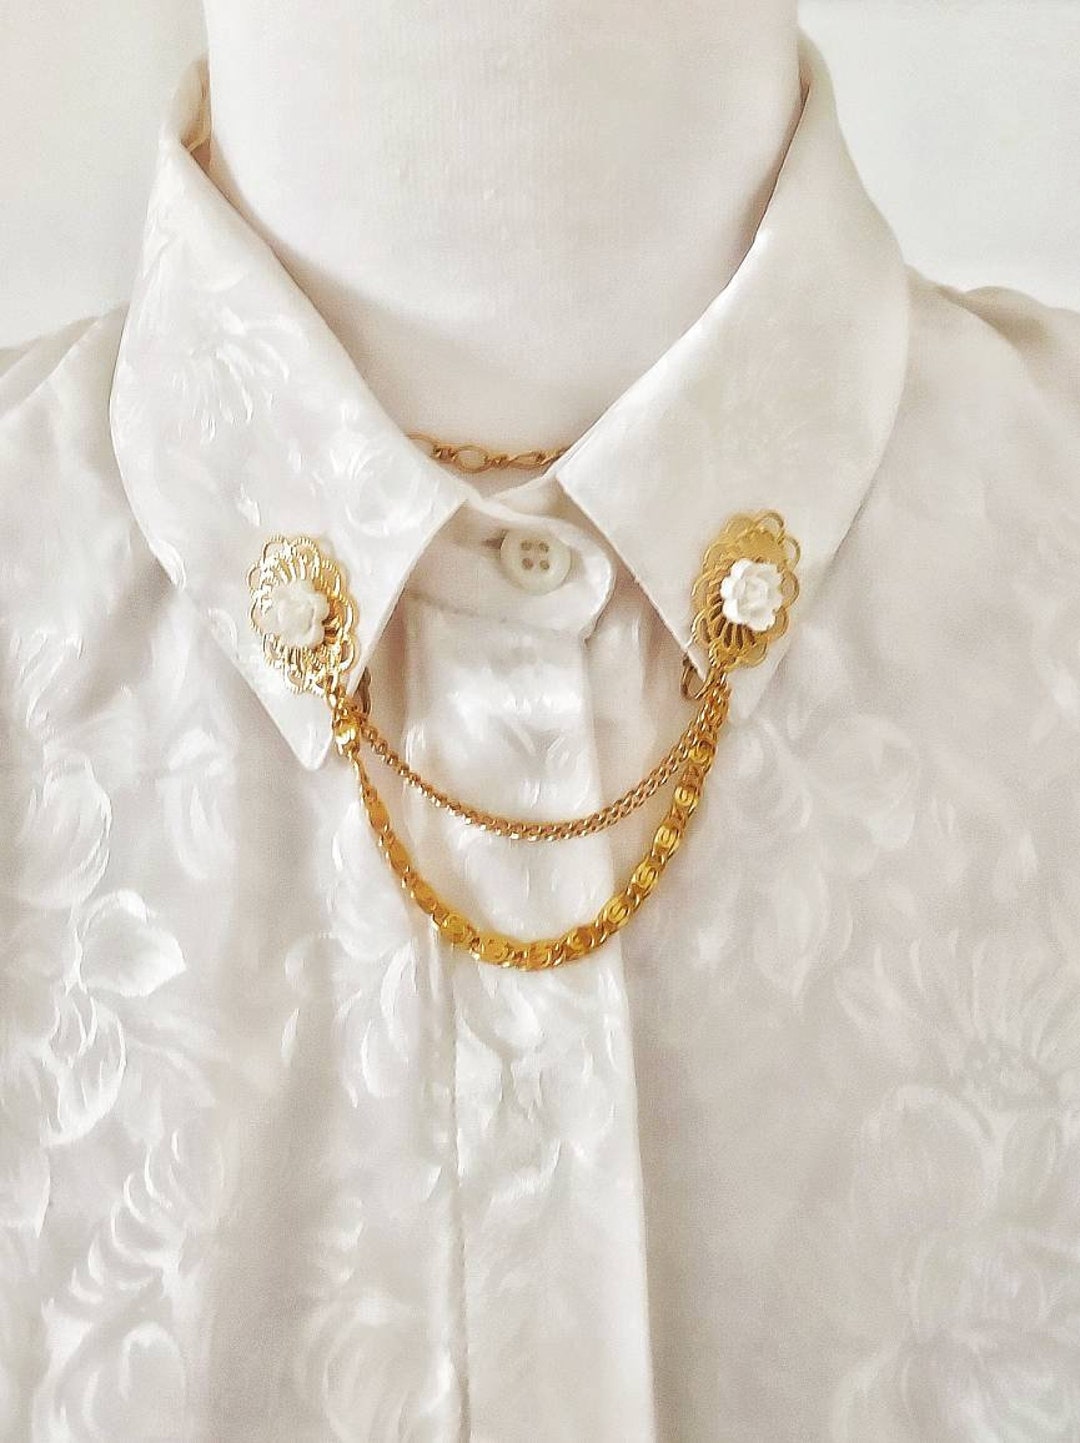 Vintage Flower Gold Collar Clips Chain New Old Stock 80s - Etsy